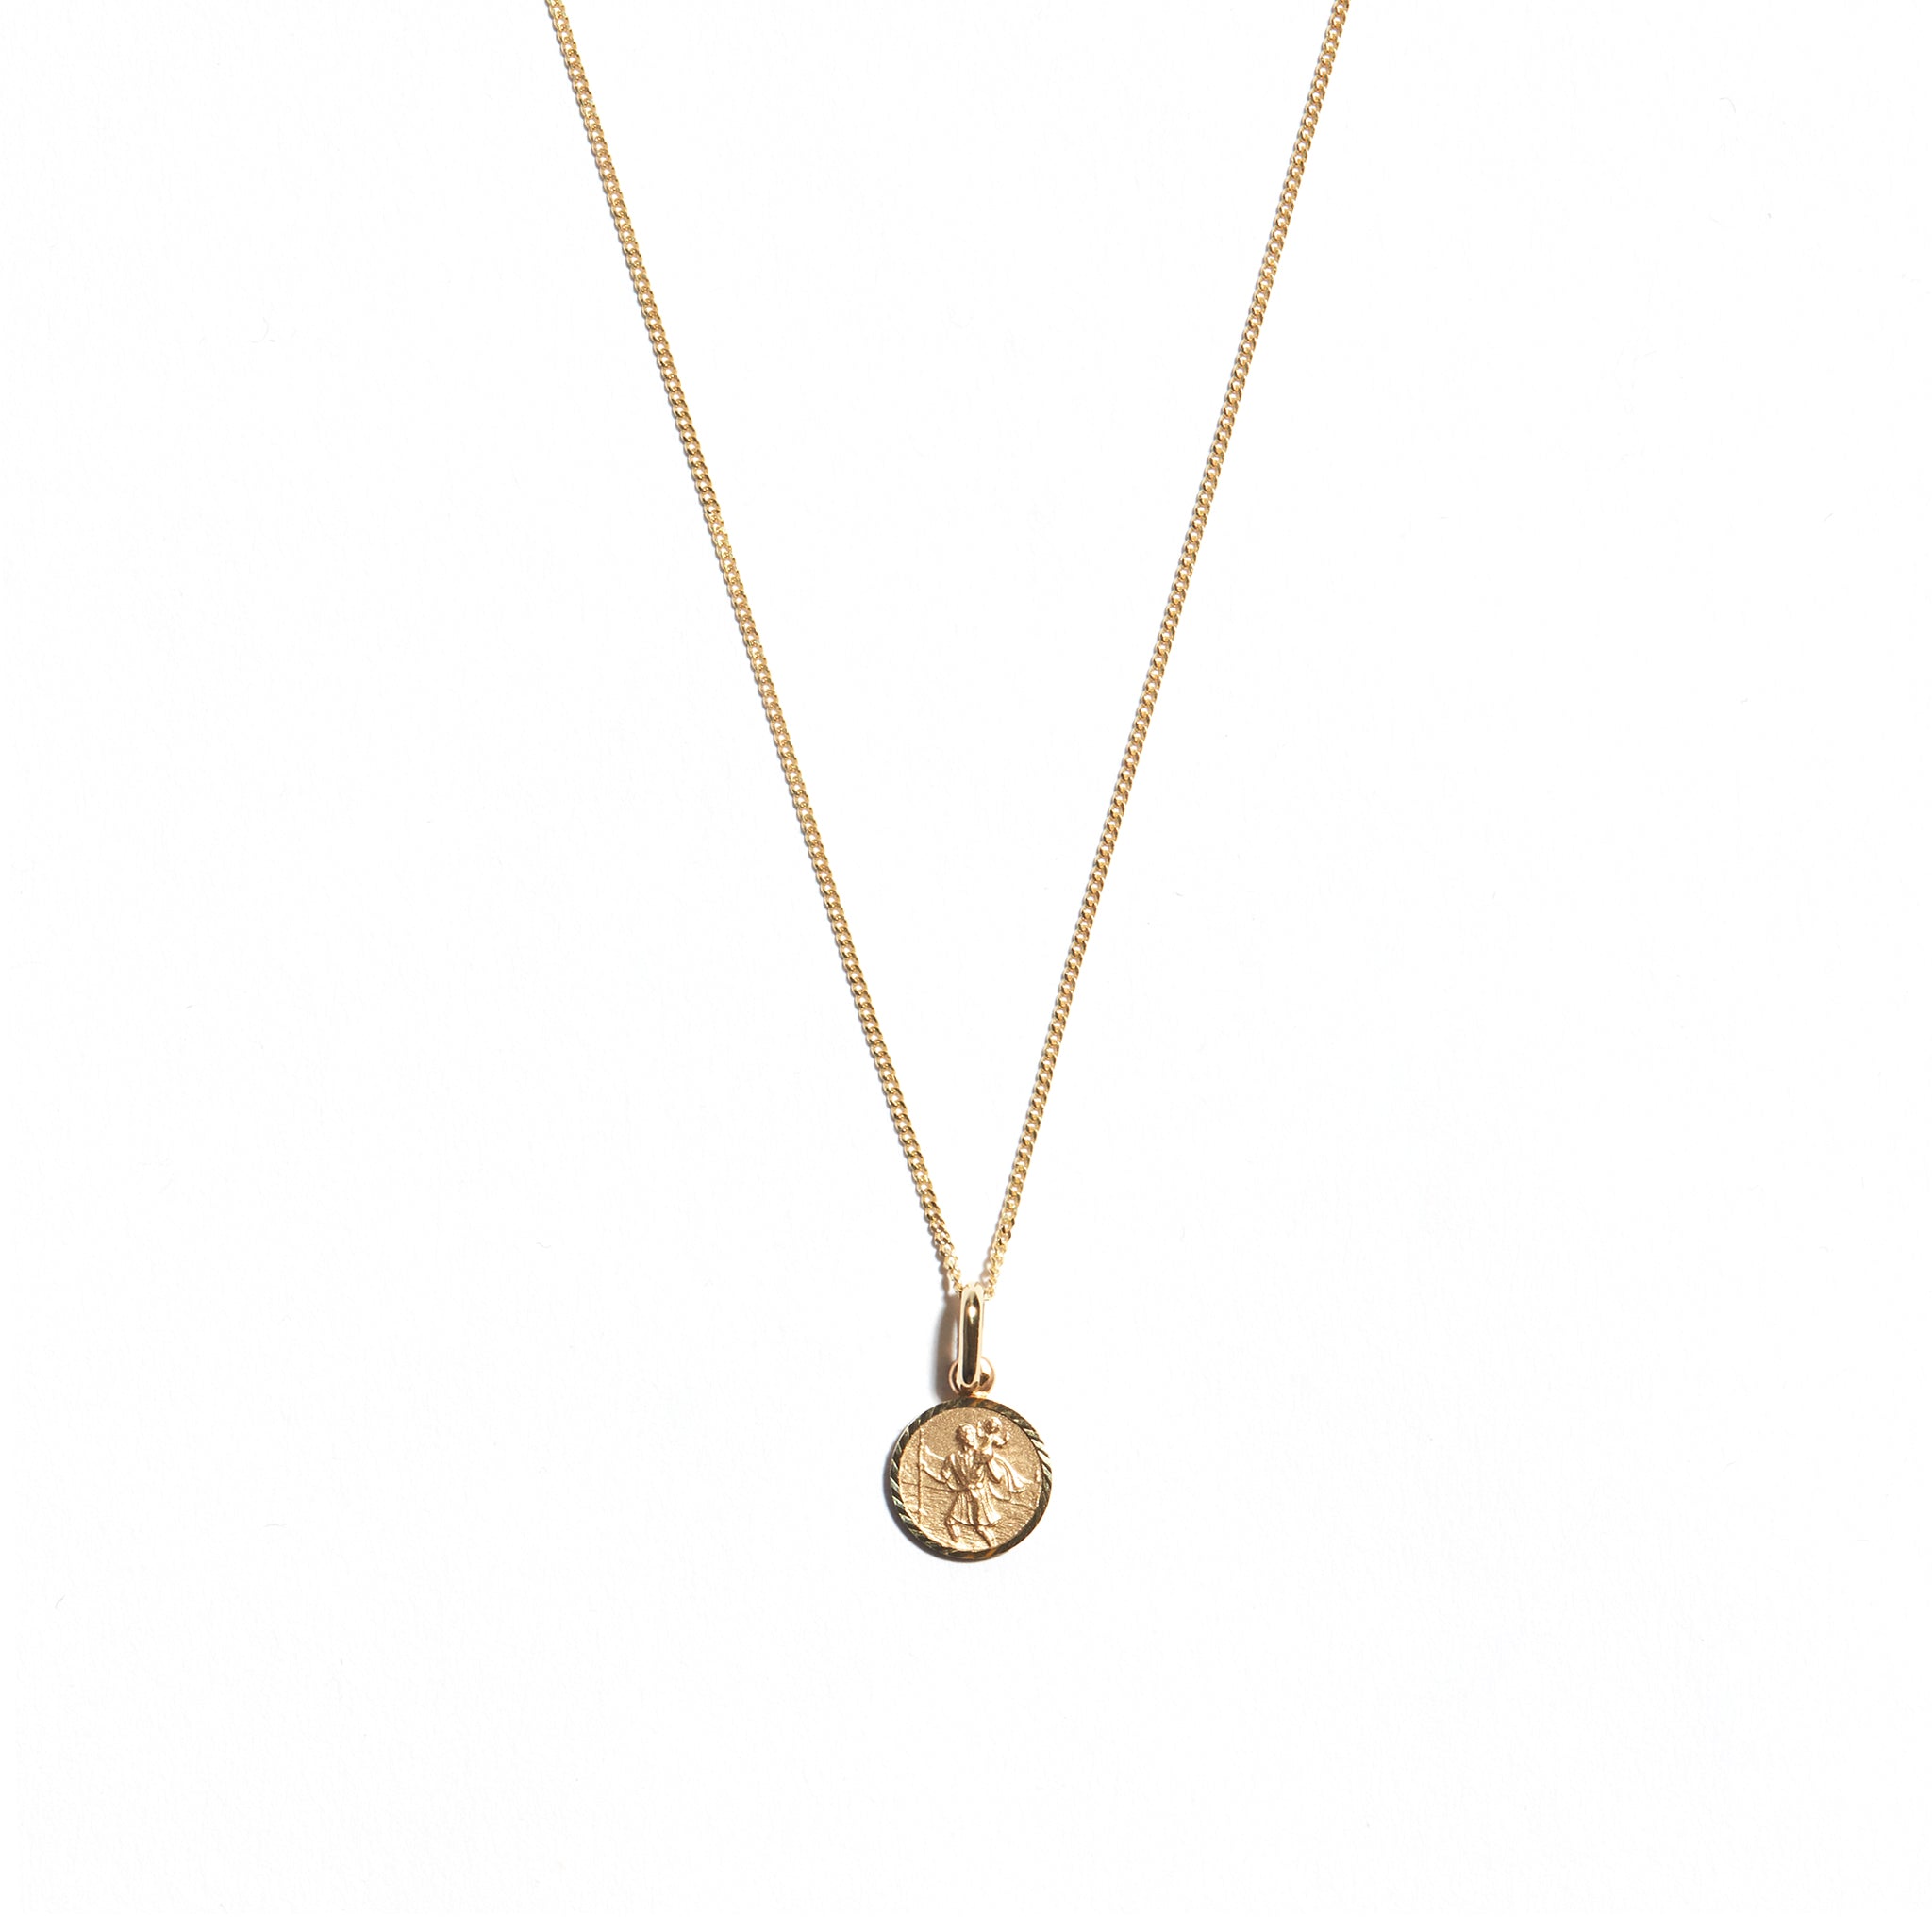 Elevate your look with the 9 carat yellow gold Small St Christopher Medal. This iconic accessory features a beautifully crafted medal depicting St Christopher, known for protection during travels. Perfect for adding a delicate touch of faith and style to your ensemble.